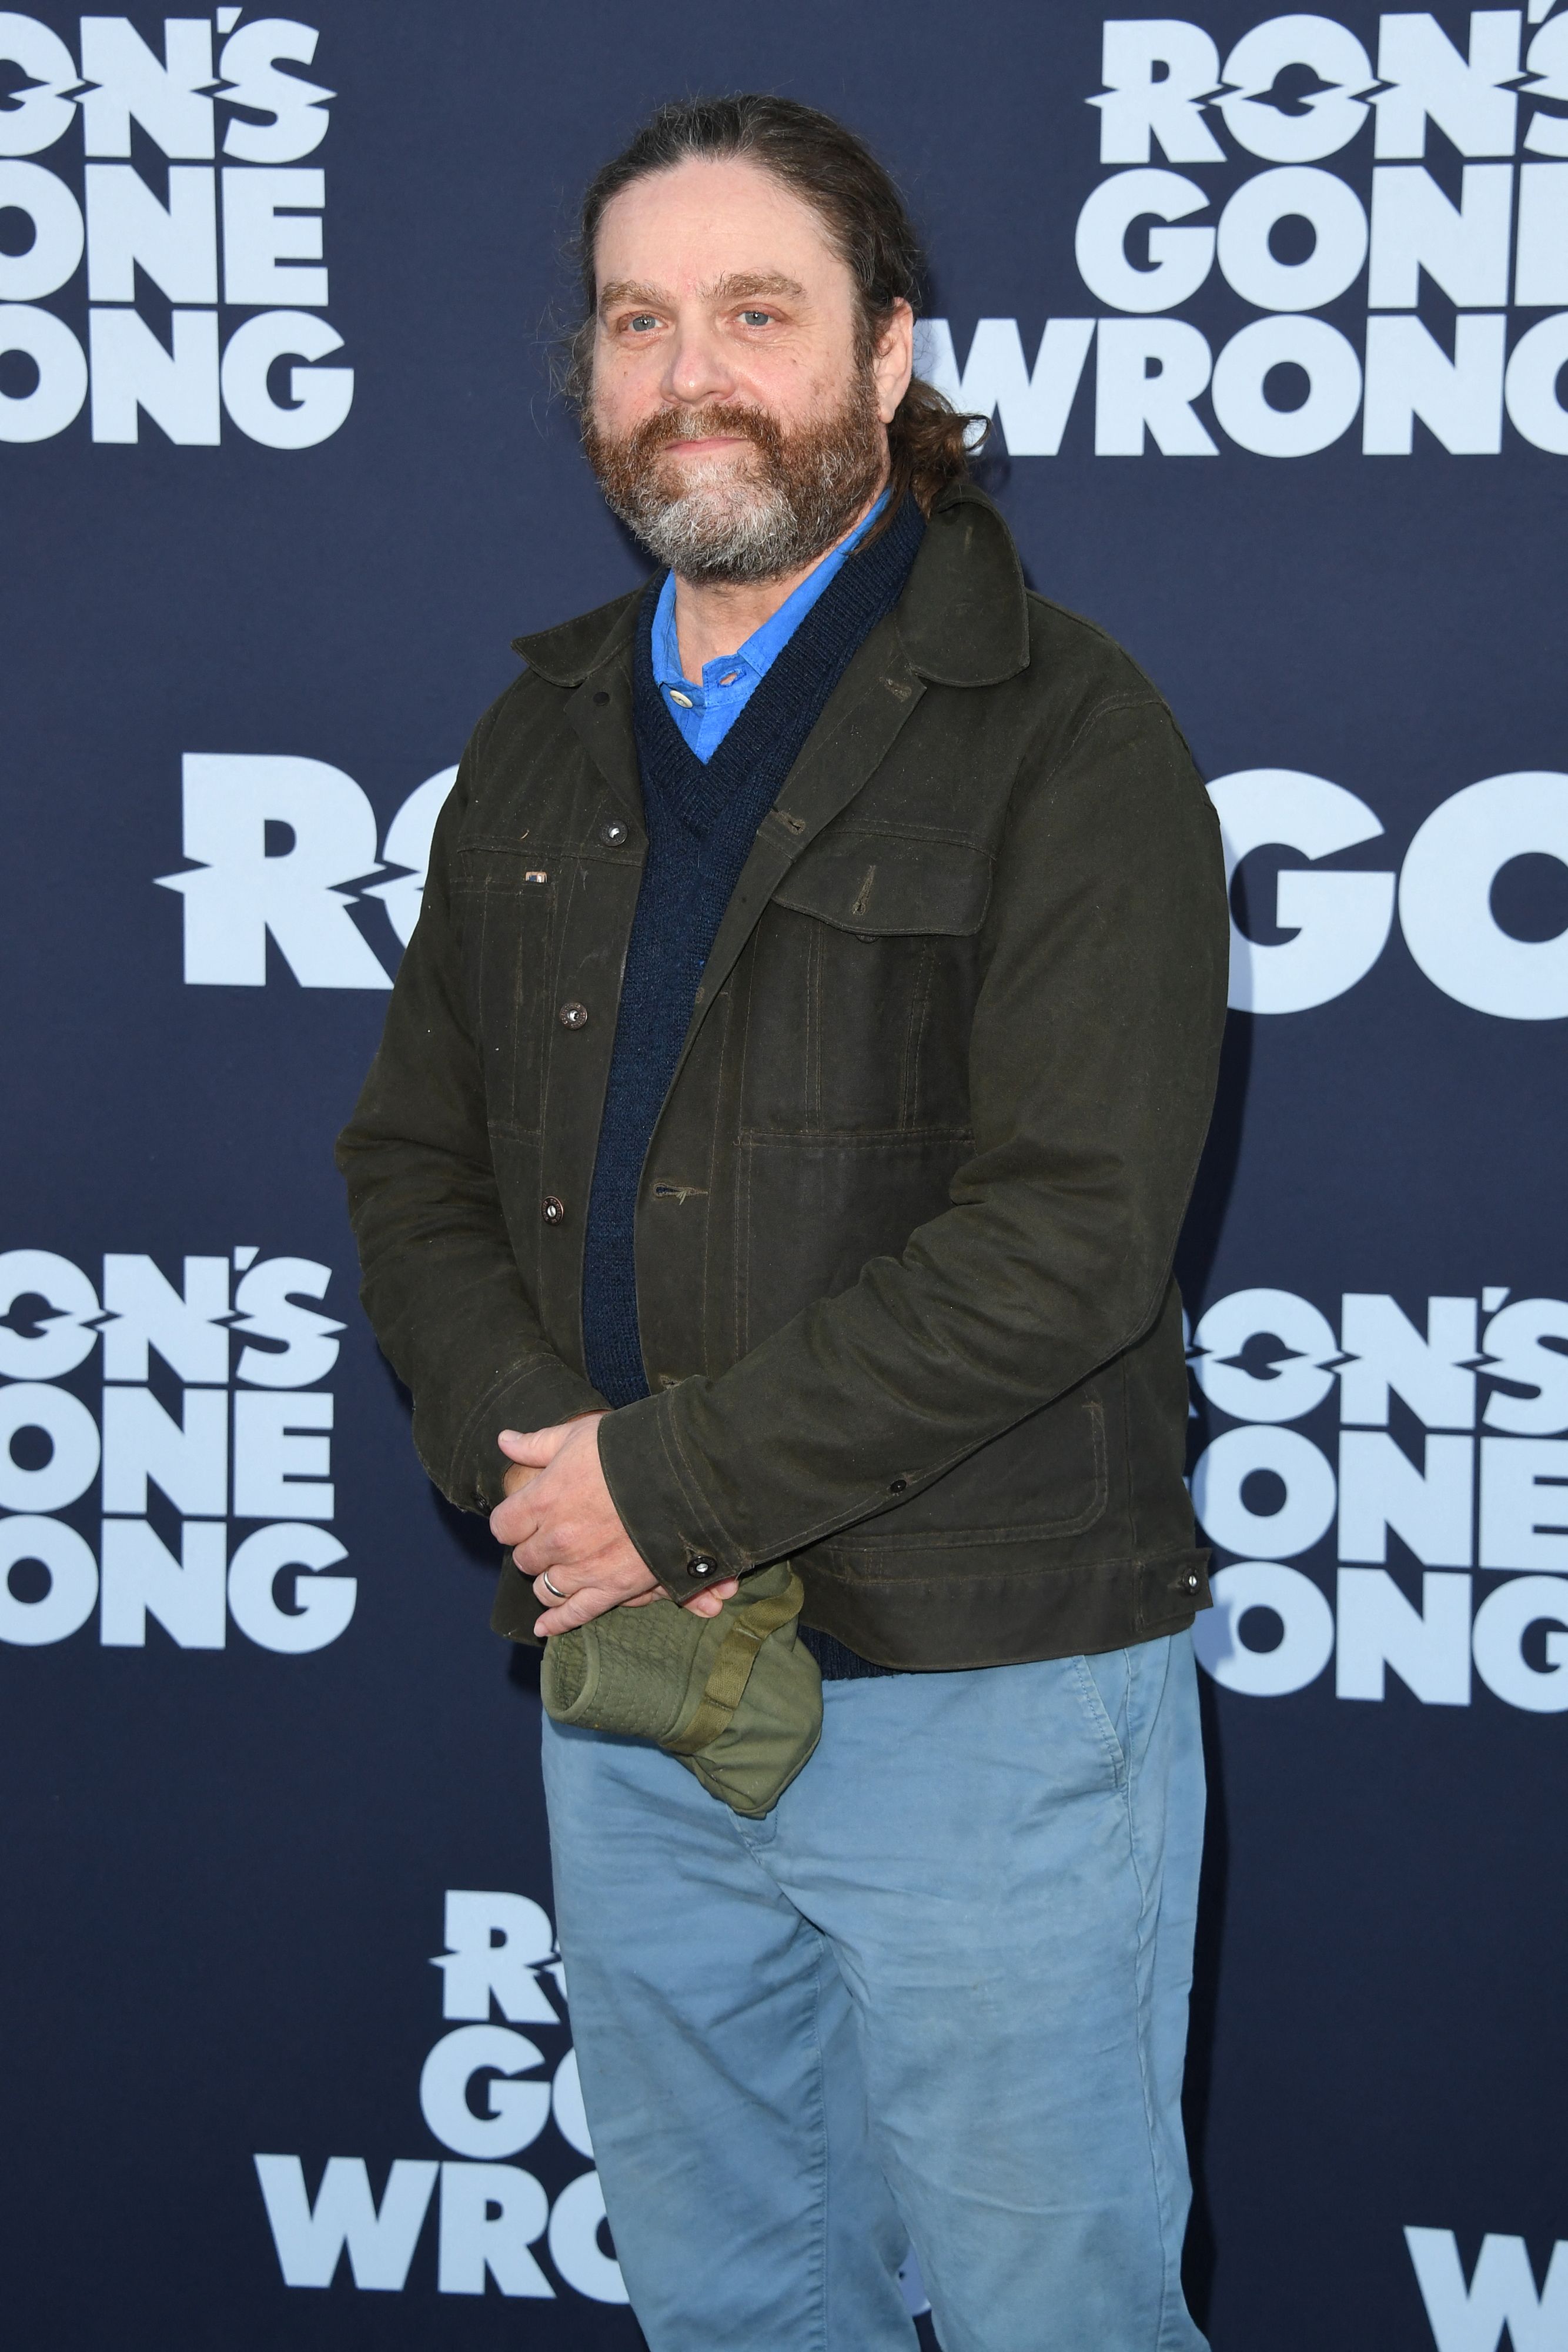 Zach Galifianakis arrives for the premiere of "Ron's Gone Wrong" at the El Capitan Theatre in Hollywood, California, on October 19, 2021. | Source: Getty Images